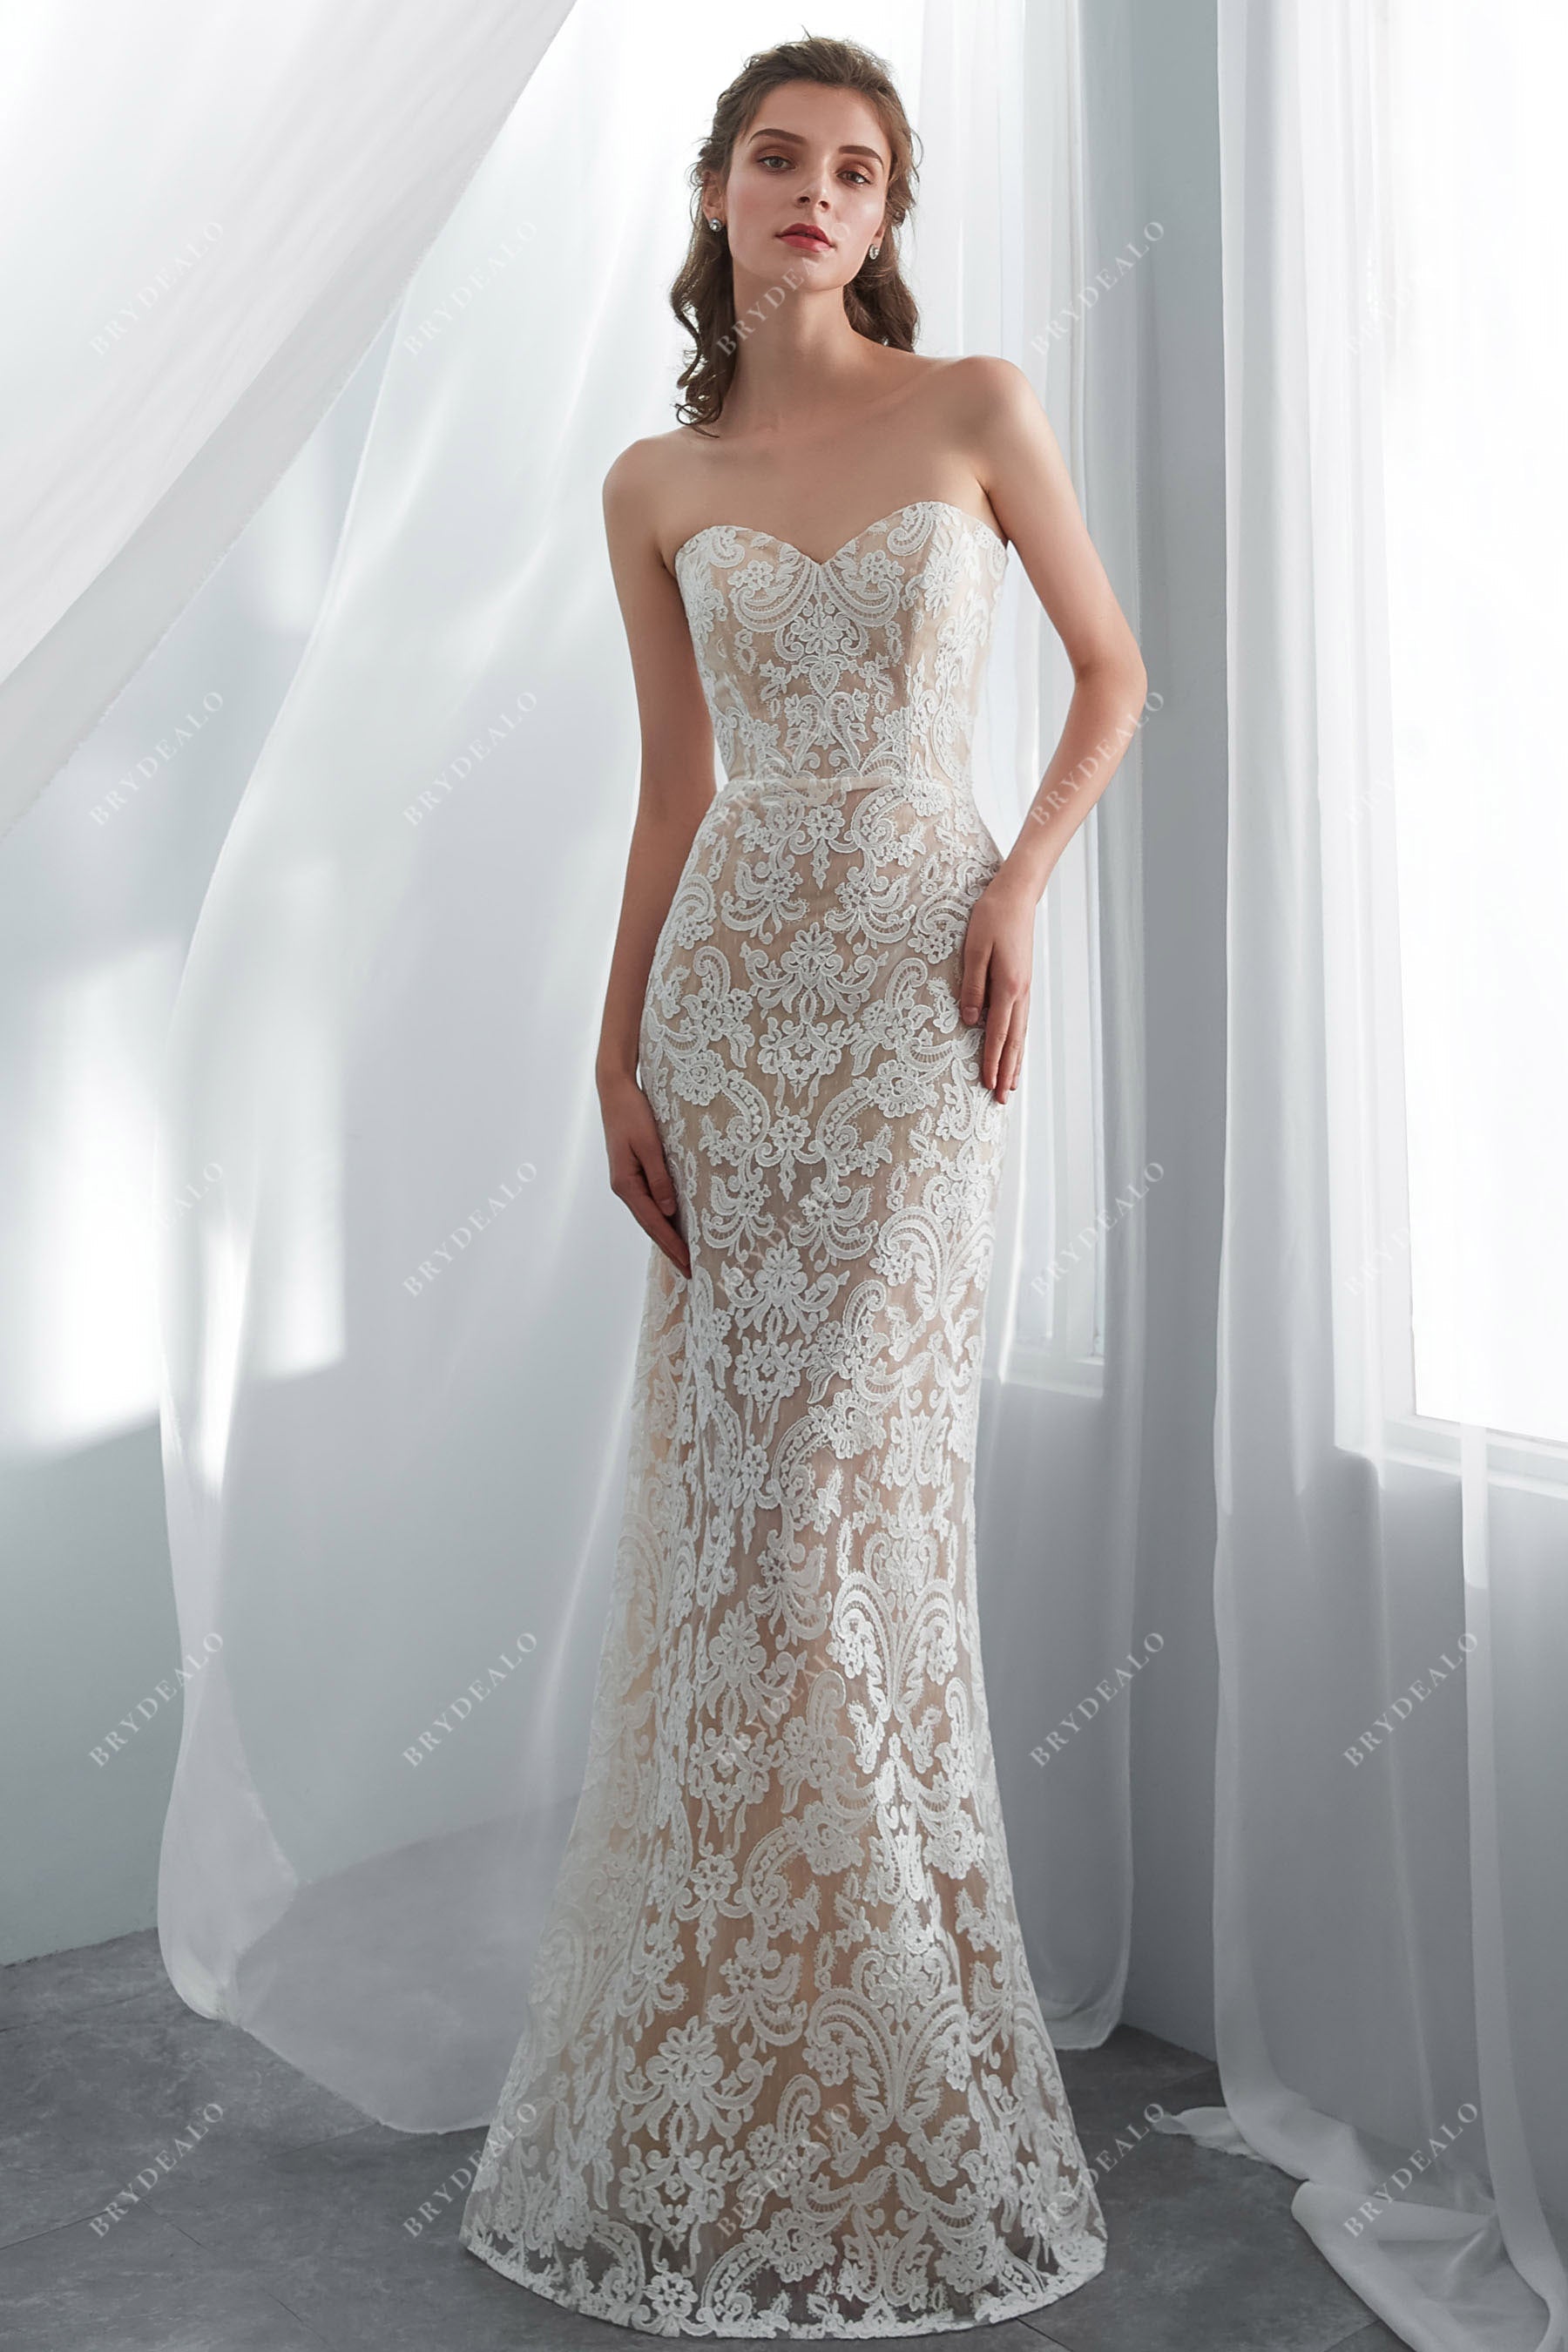 Champagne Designer Lace Strapless Mermaid Wedding Gown